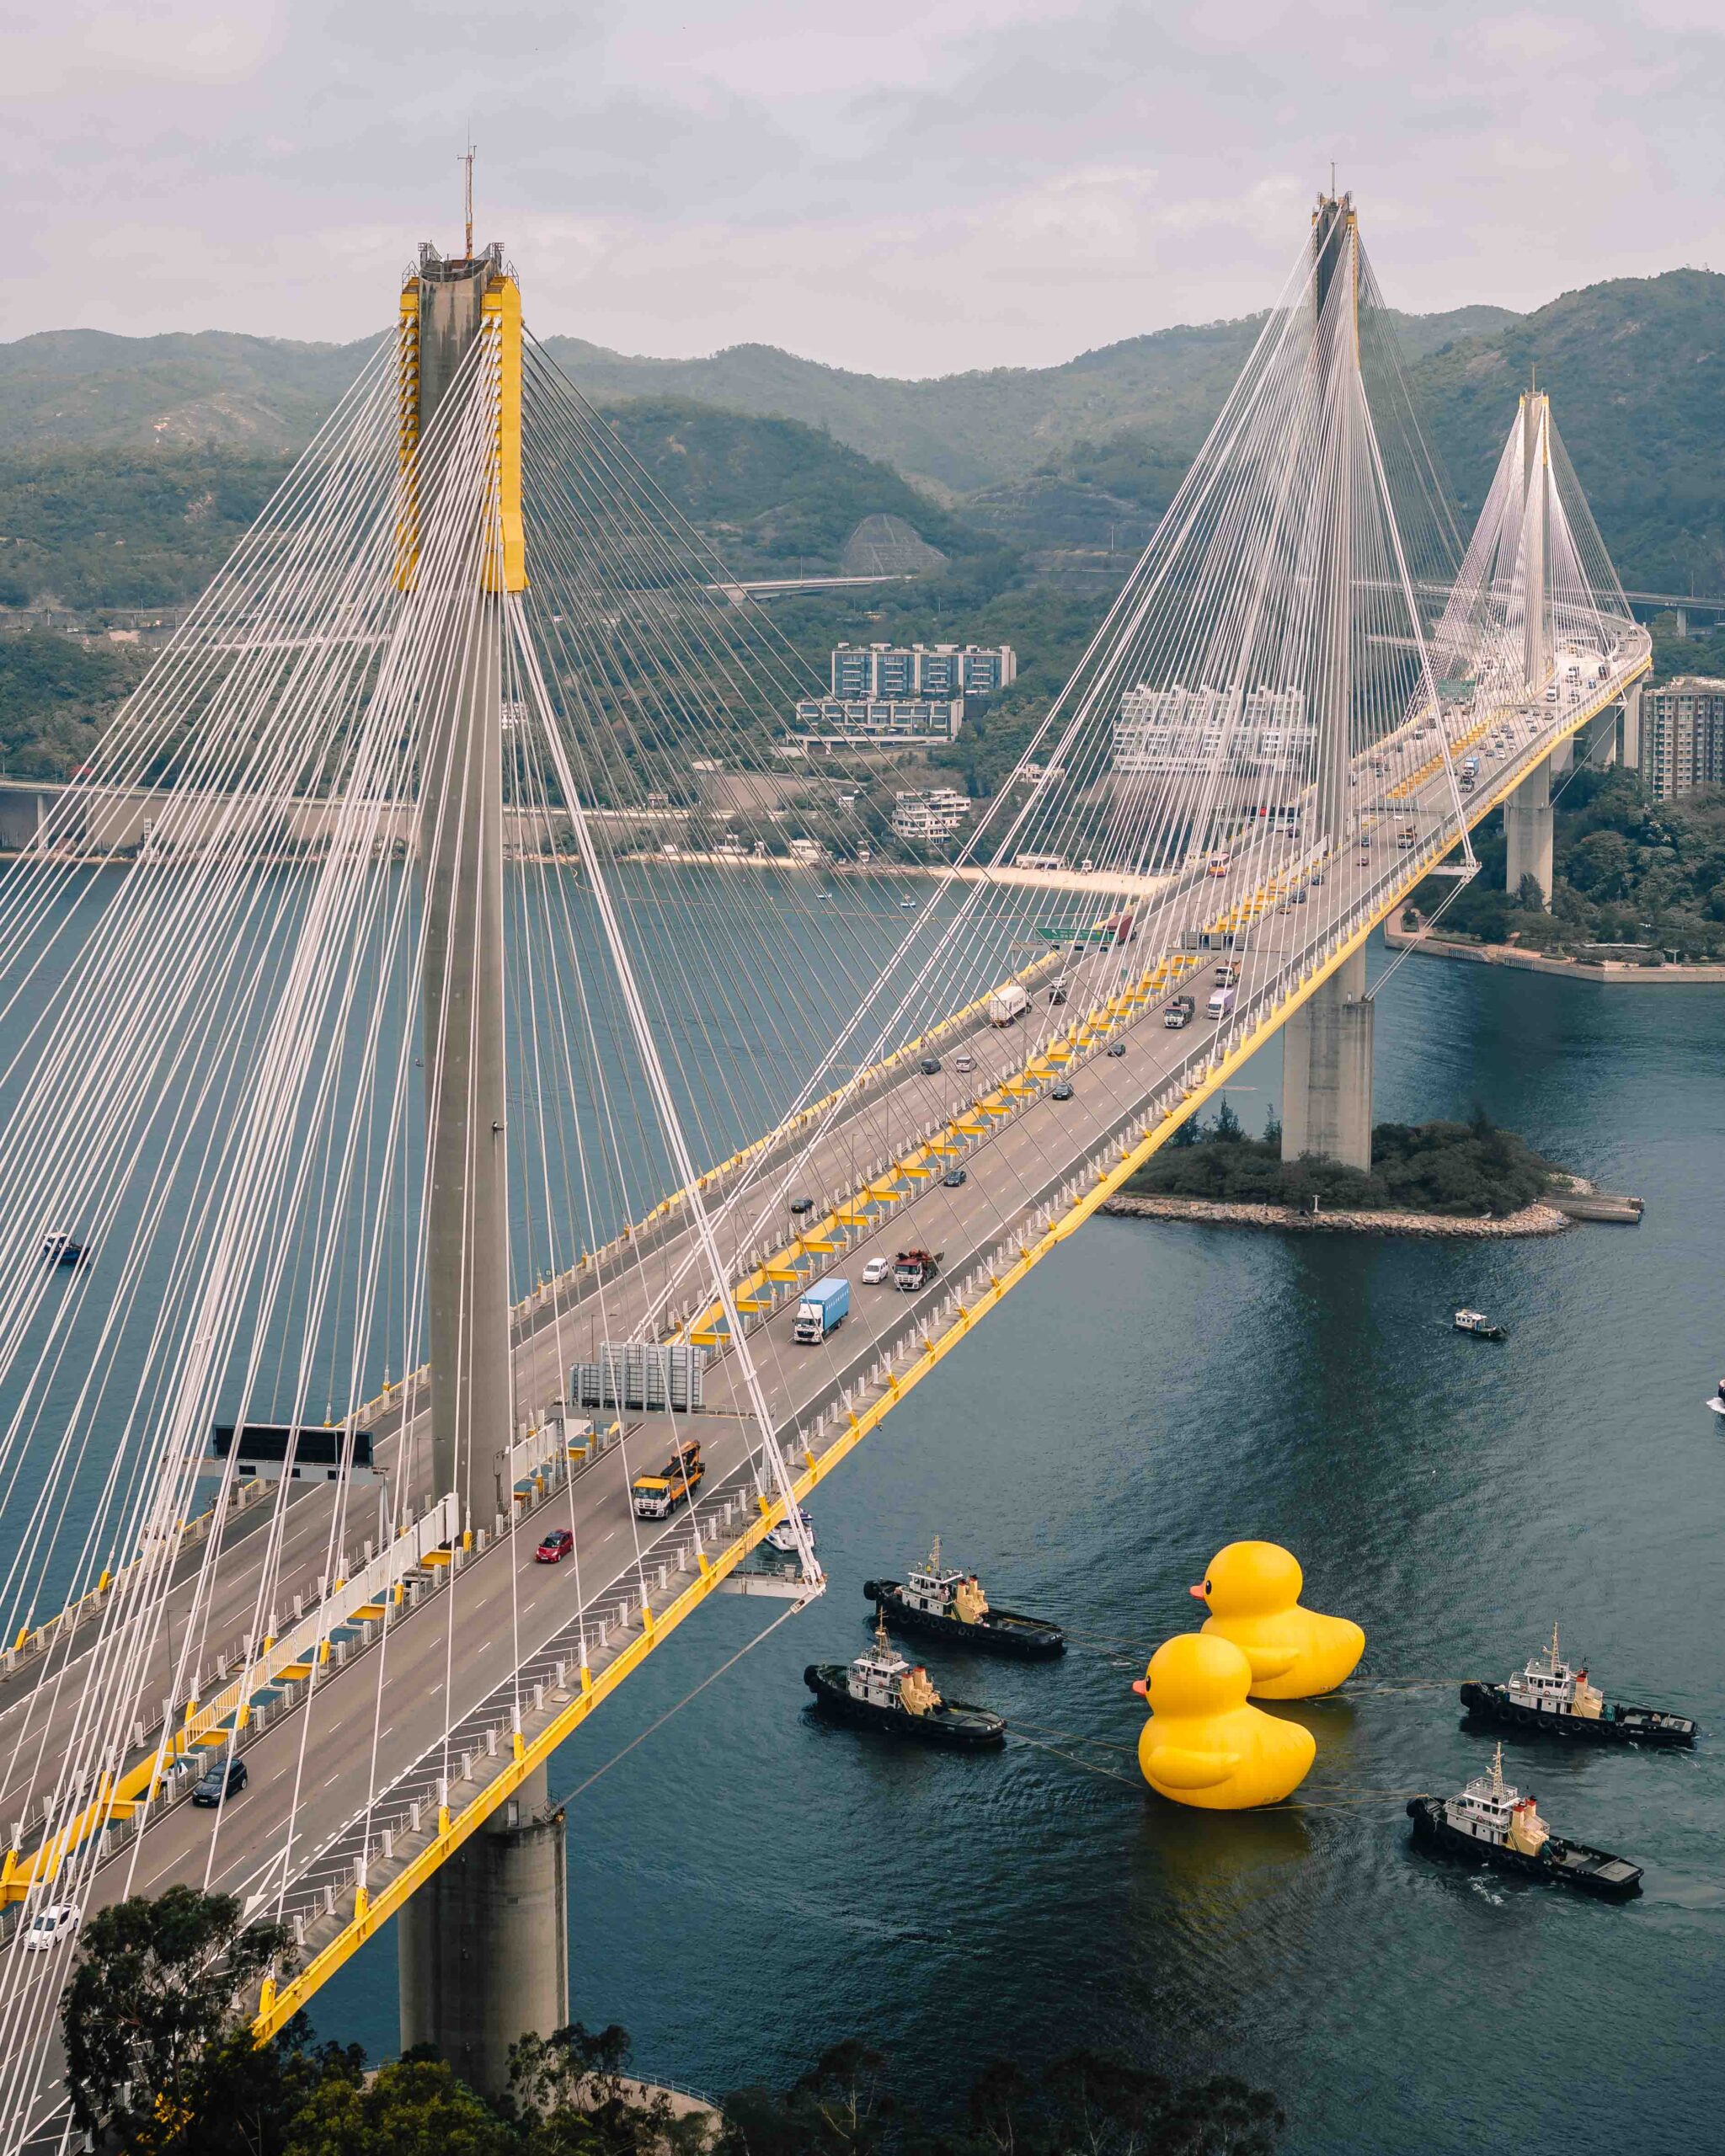 Two giant inflatable rubber ducks being towed under a bridge in Hong Kong.